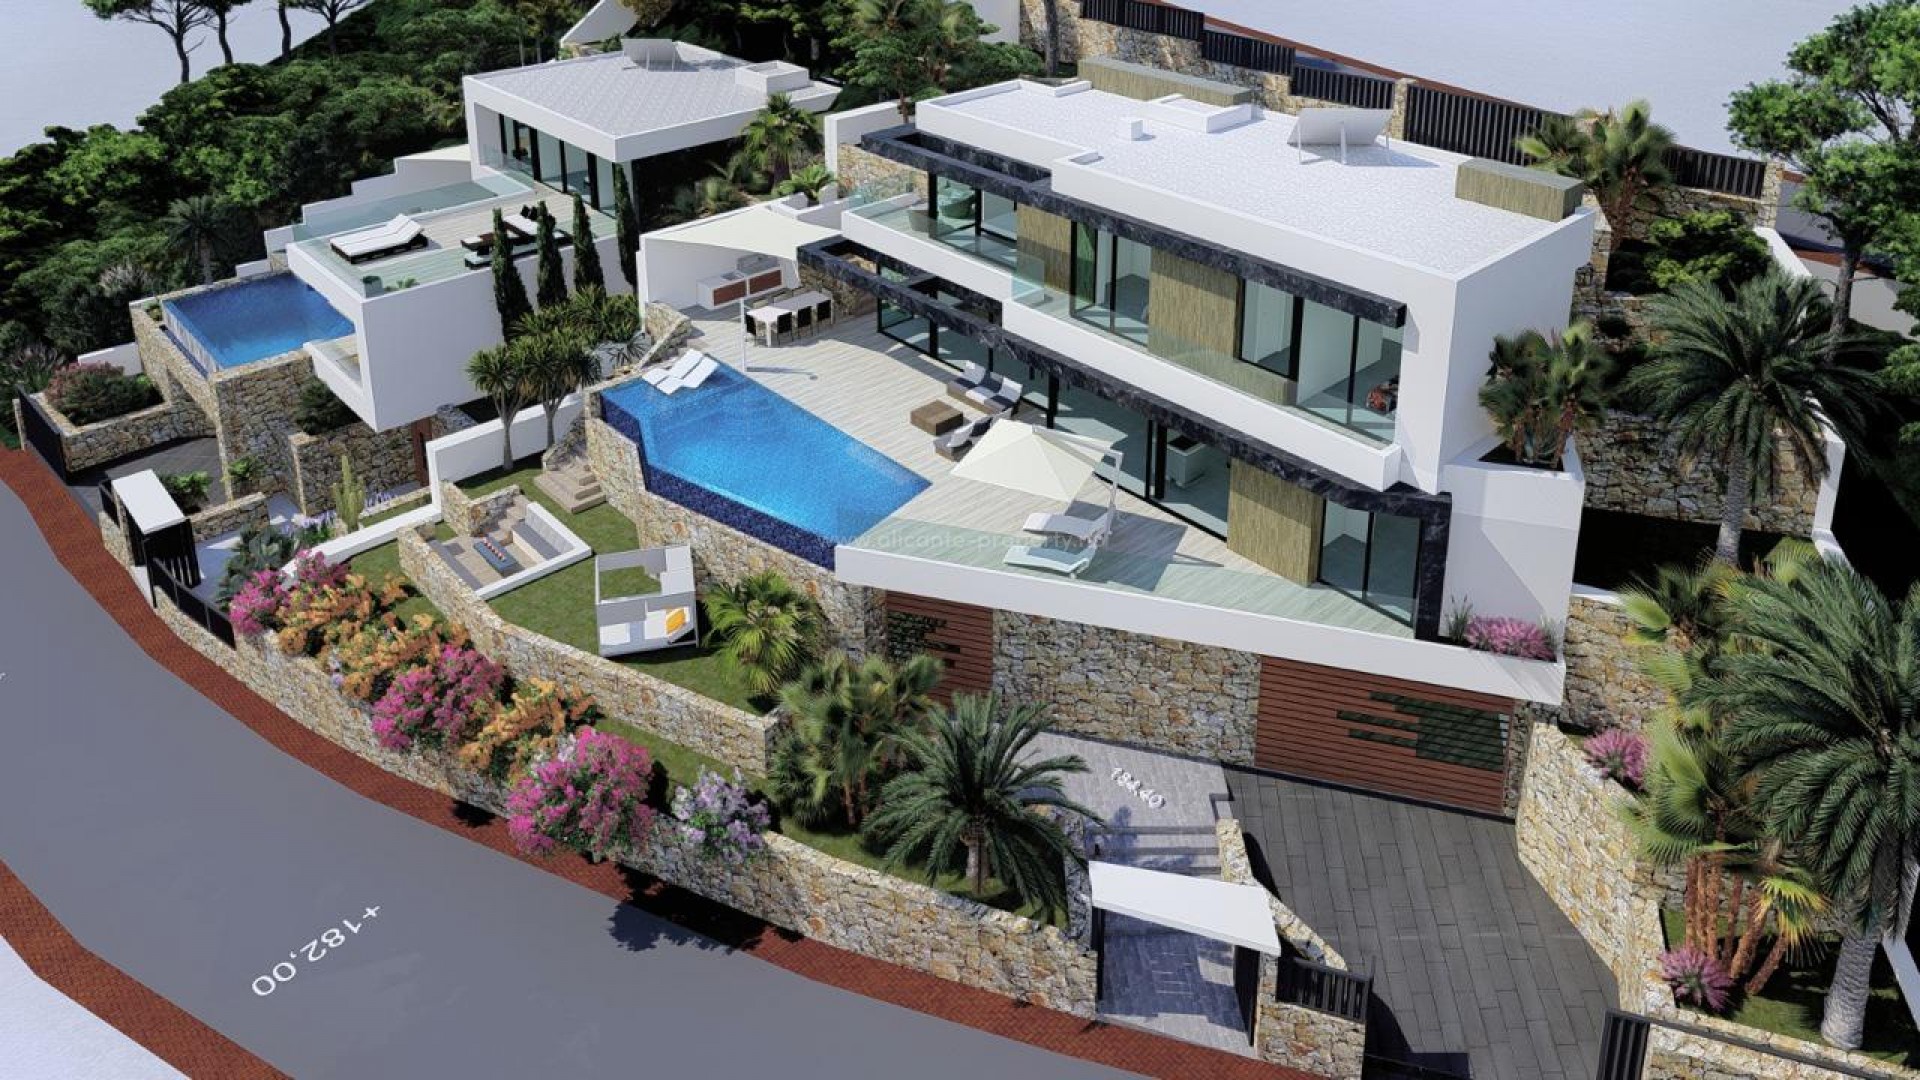 Exclusive luxury villa in Maryvilla, Calpe with spectacular views over the sea and the Penon and Calpe bays. High-tech villa with high-quality materials